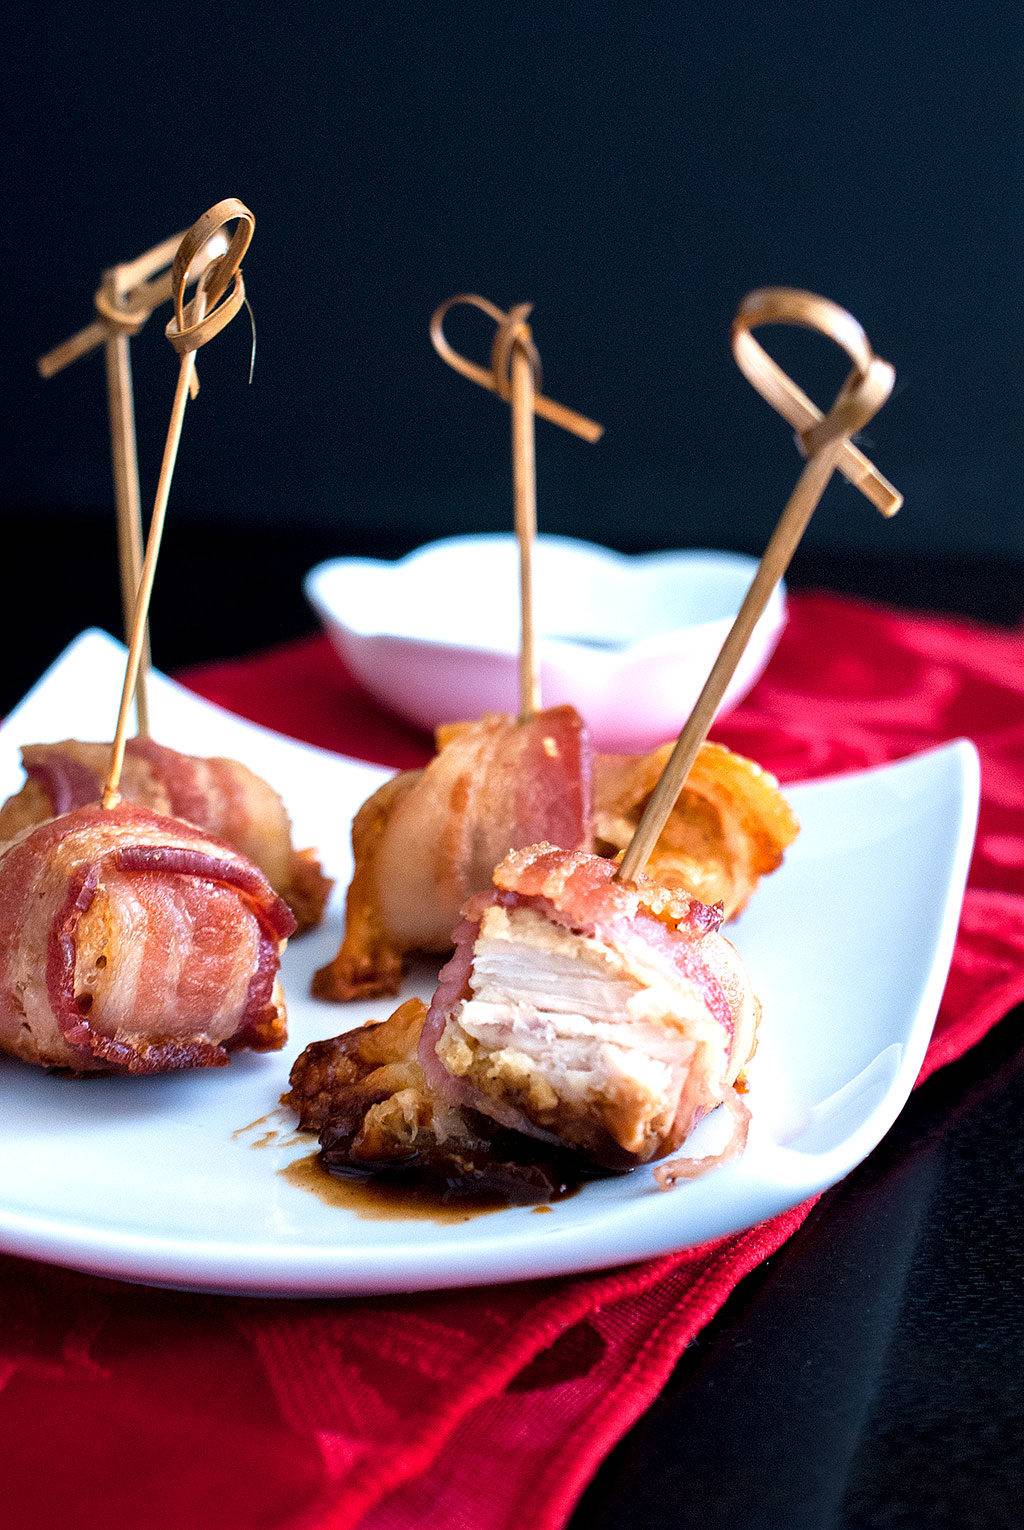 [ad] Bacon Wrapped Chicken Dippers - 15 minutes to a crazy good meal. Make ahead ready! #SchoolFuel